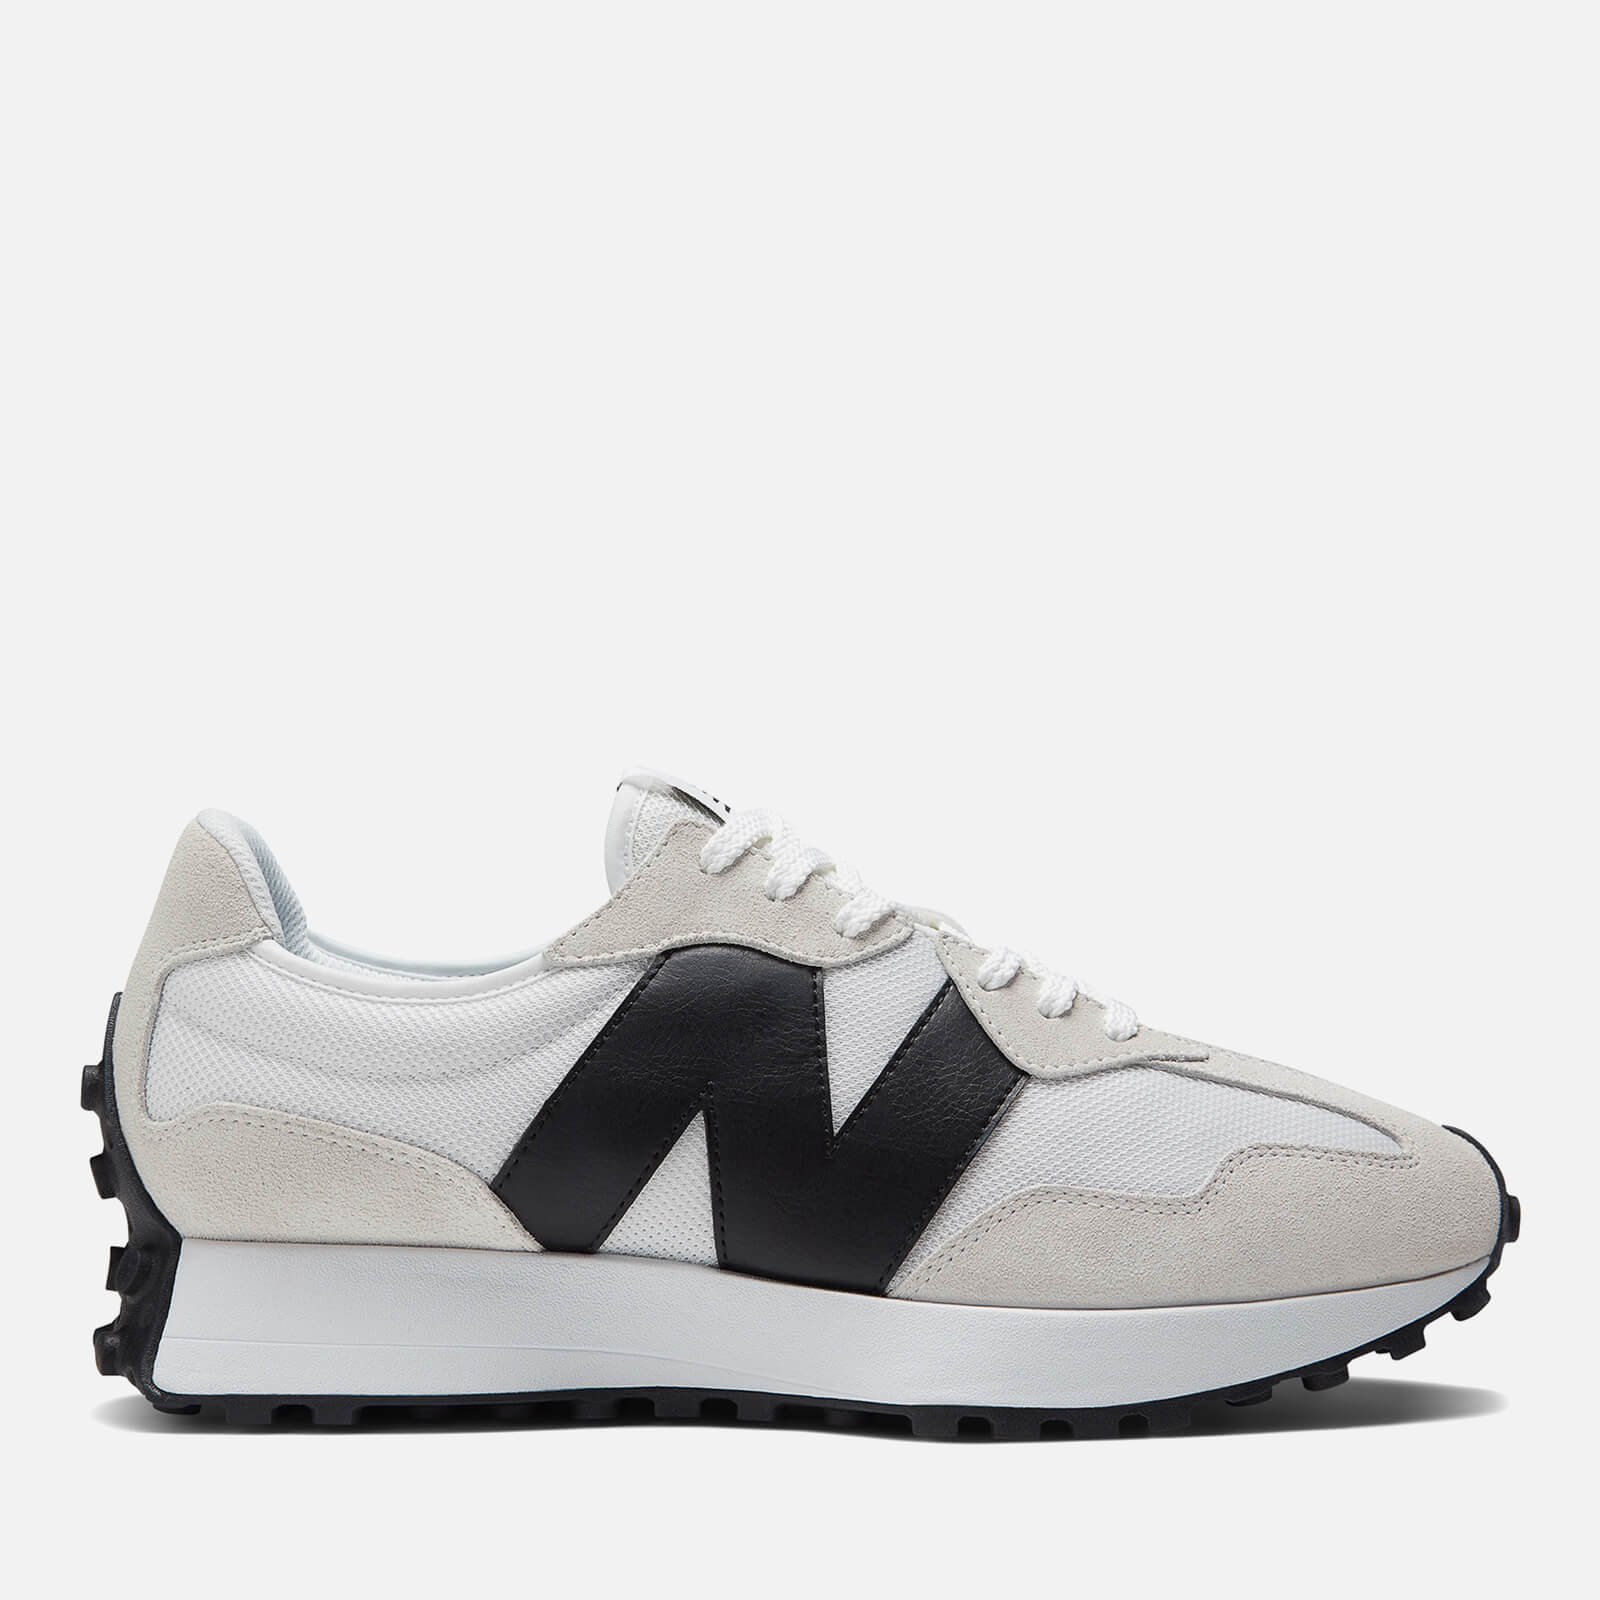 New Balance 327 Suede and Mesh Trainers - UK 8